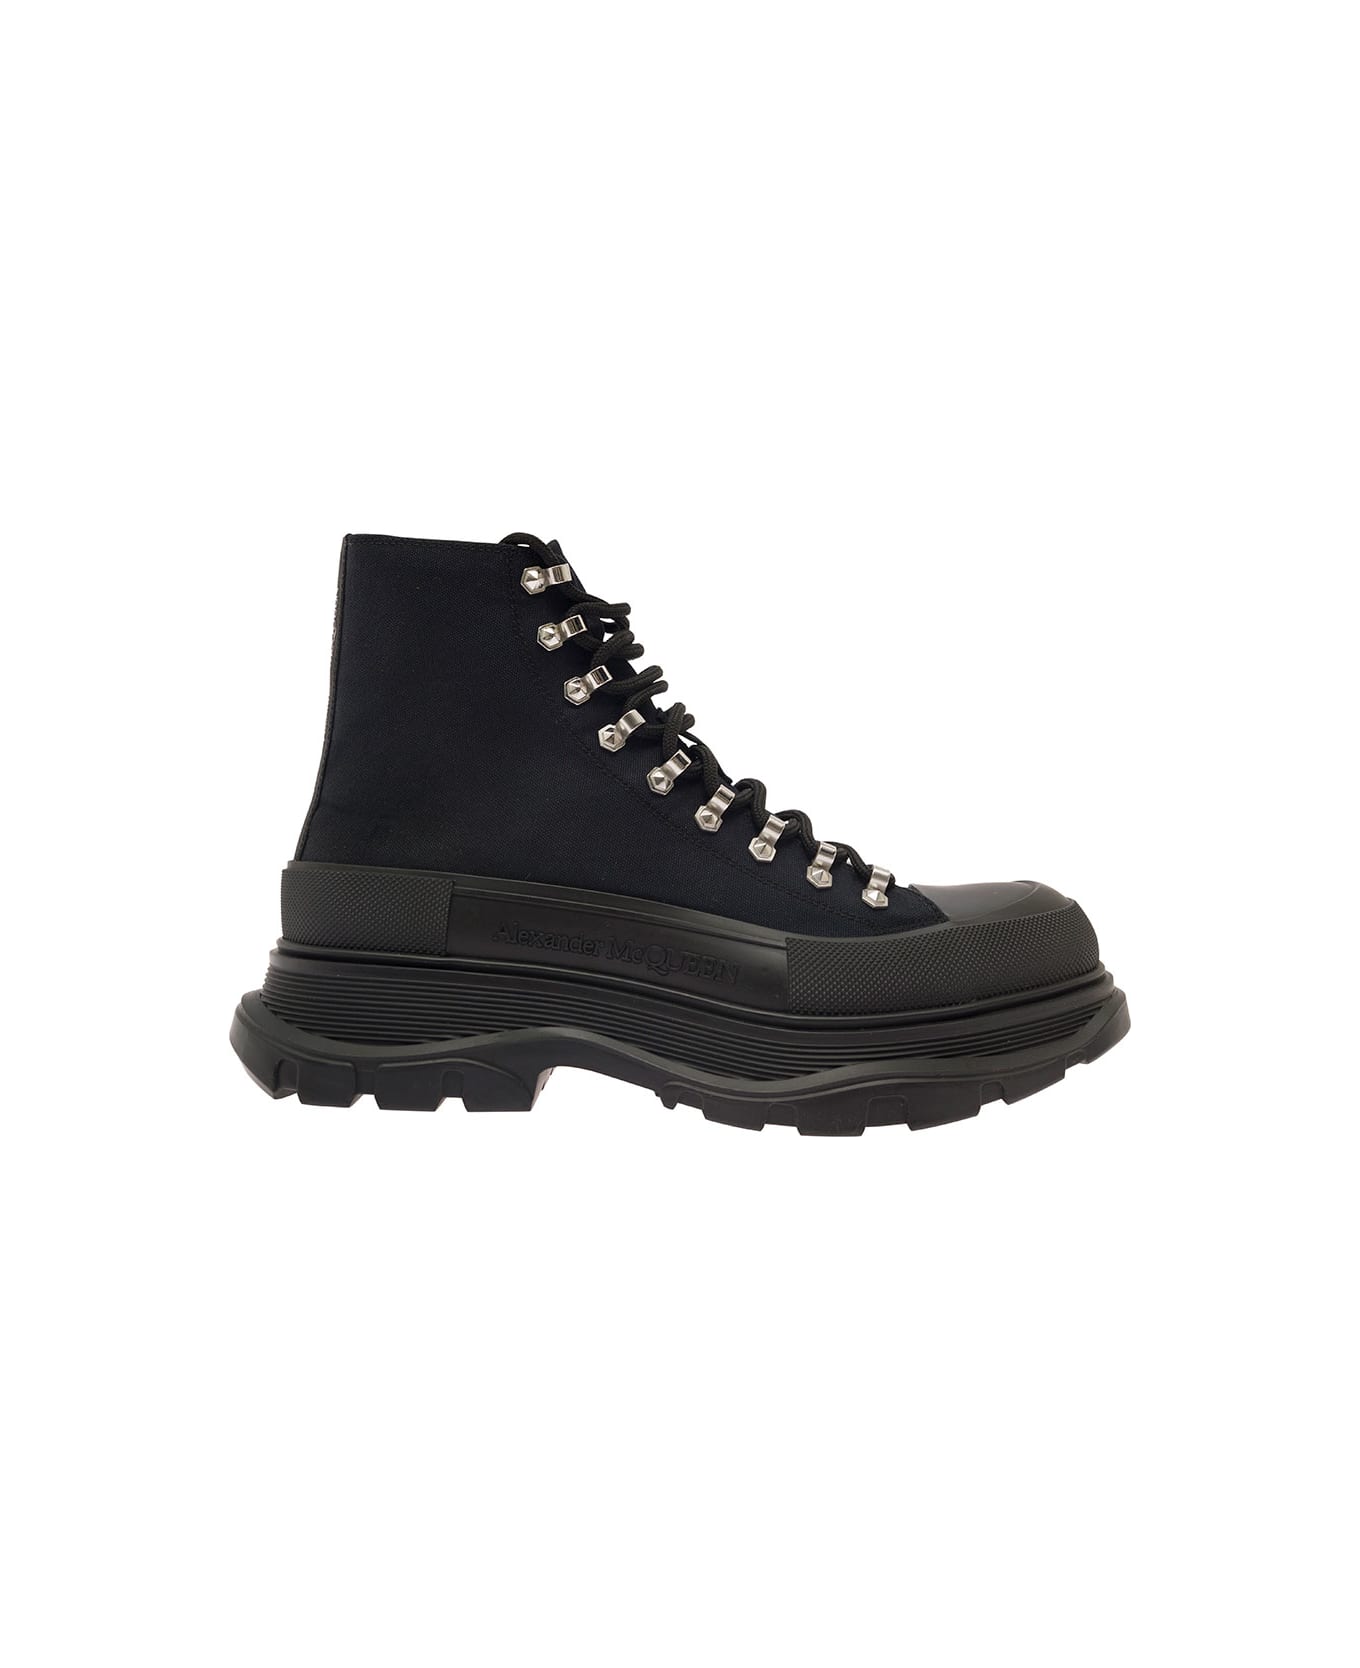 Alexander McQueen 'trade Slick' Black Lace-up Boots With Thread Sole In Canvas Man - Black ブーツ